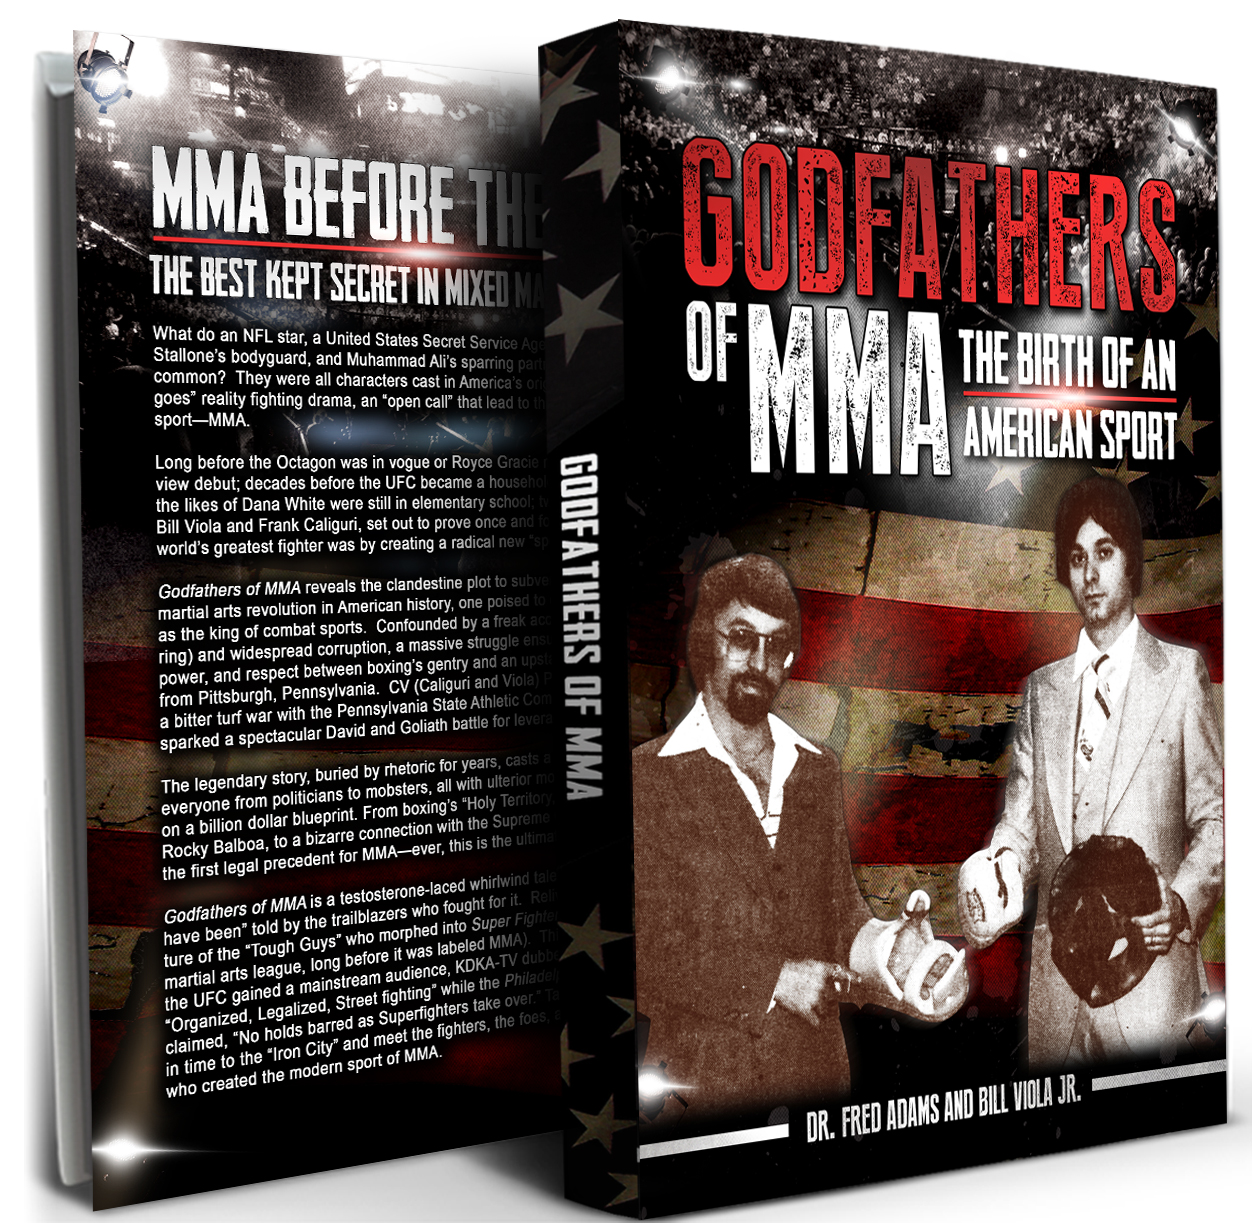 Godfathers of MMA (The Book) by Bill Viola Jr. & Dr. Fred Adams